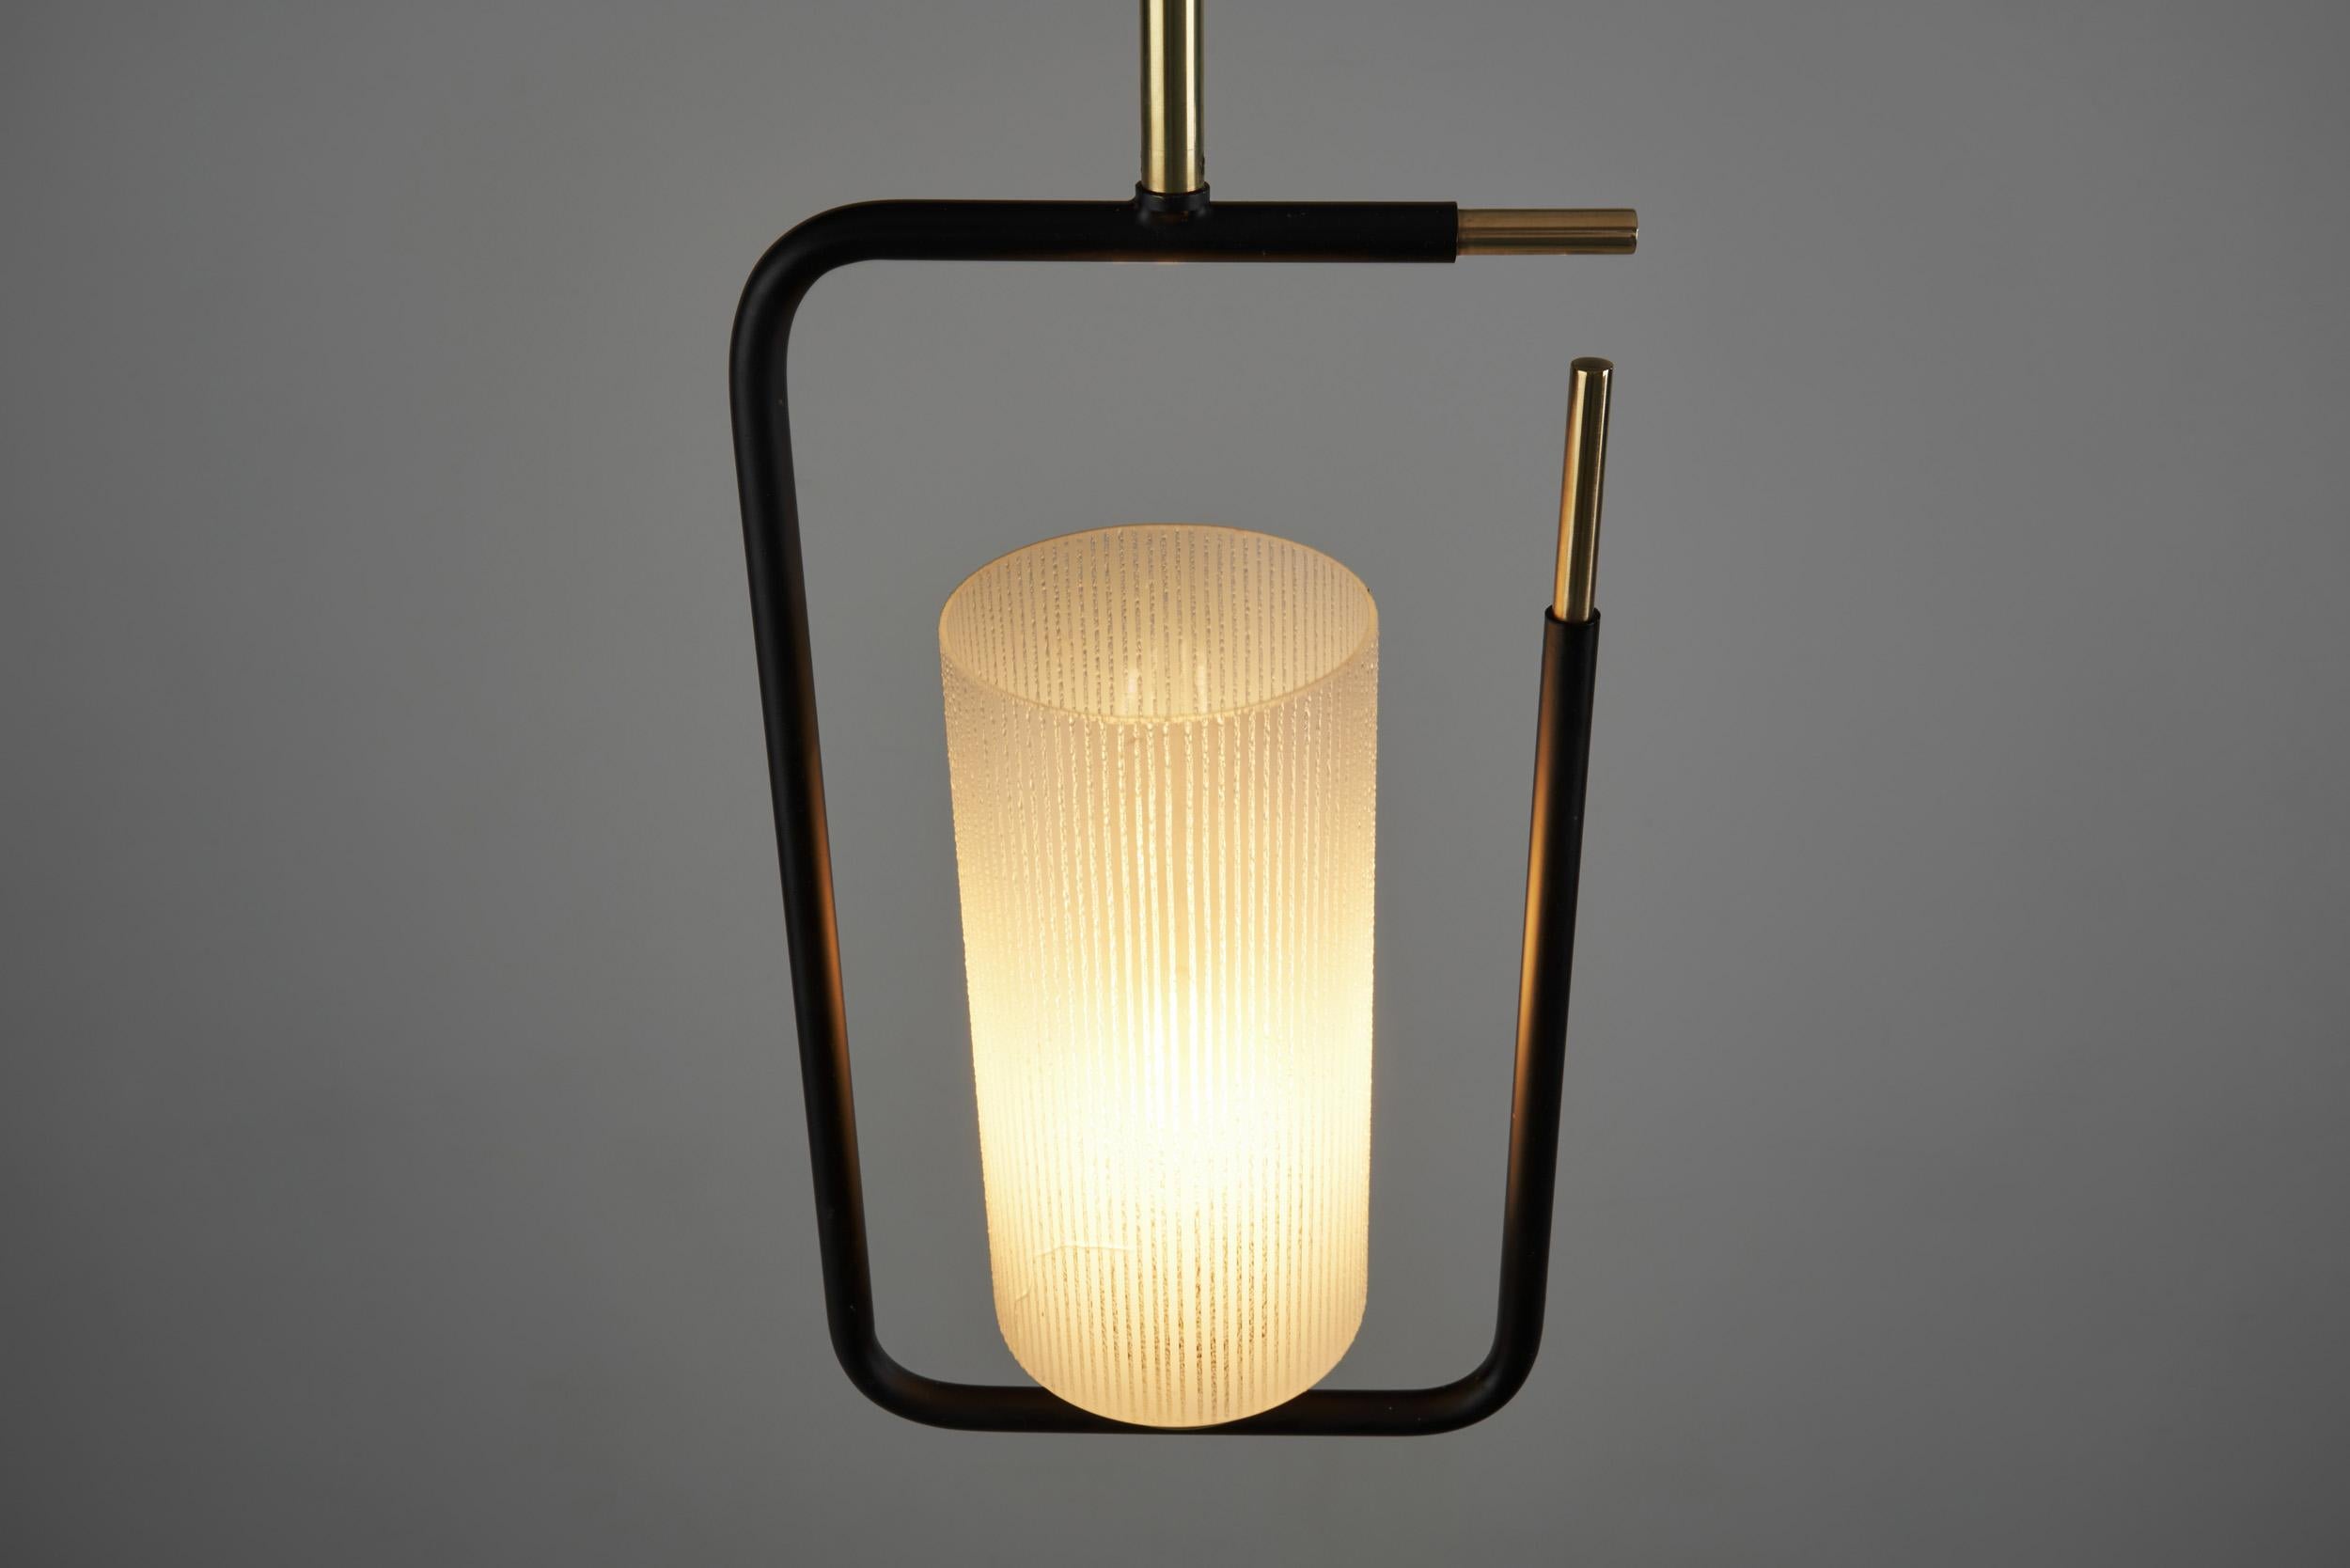 Mid-Century Modern Black Lacquered Pendant Light, Europe, 1950s For Sale 3